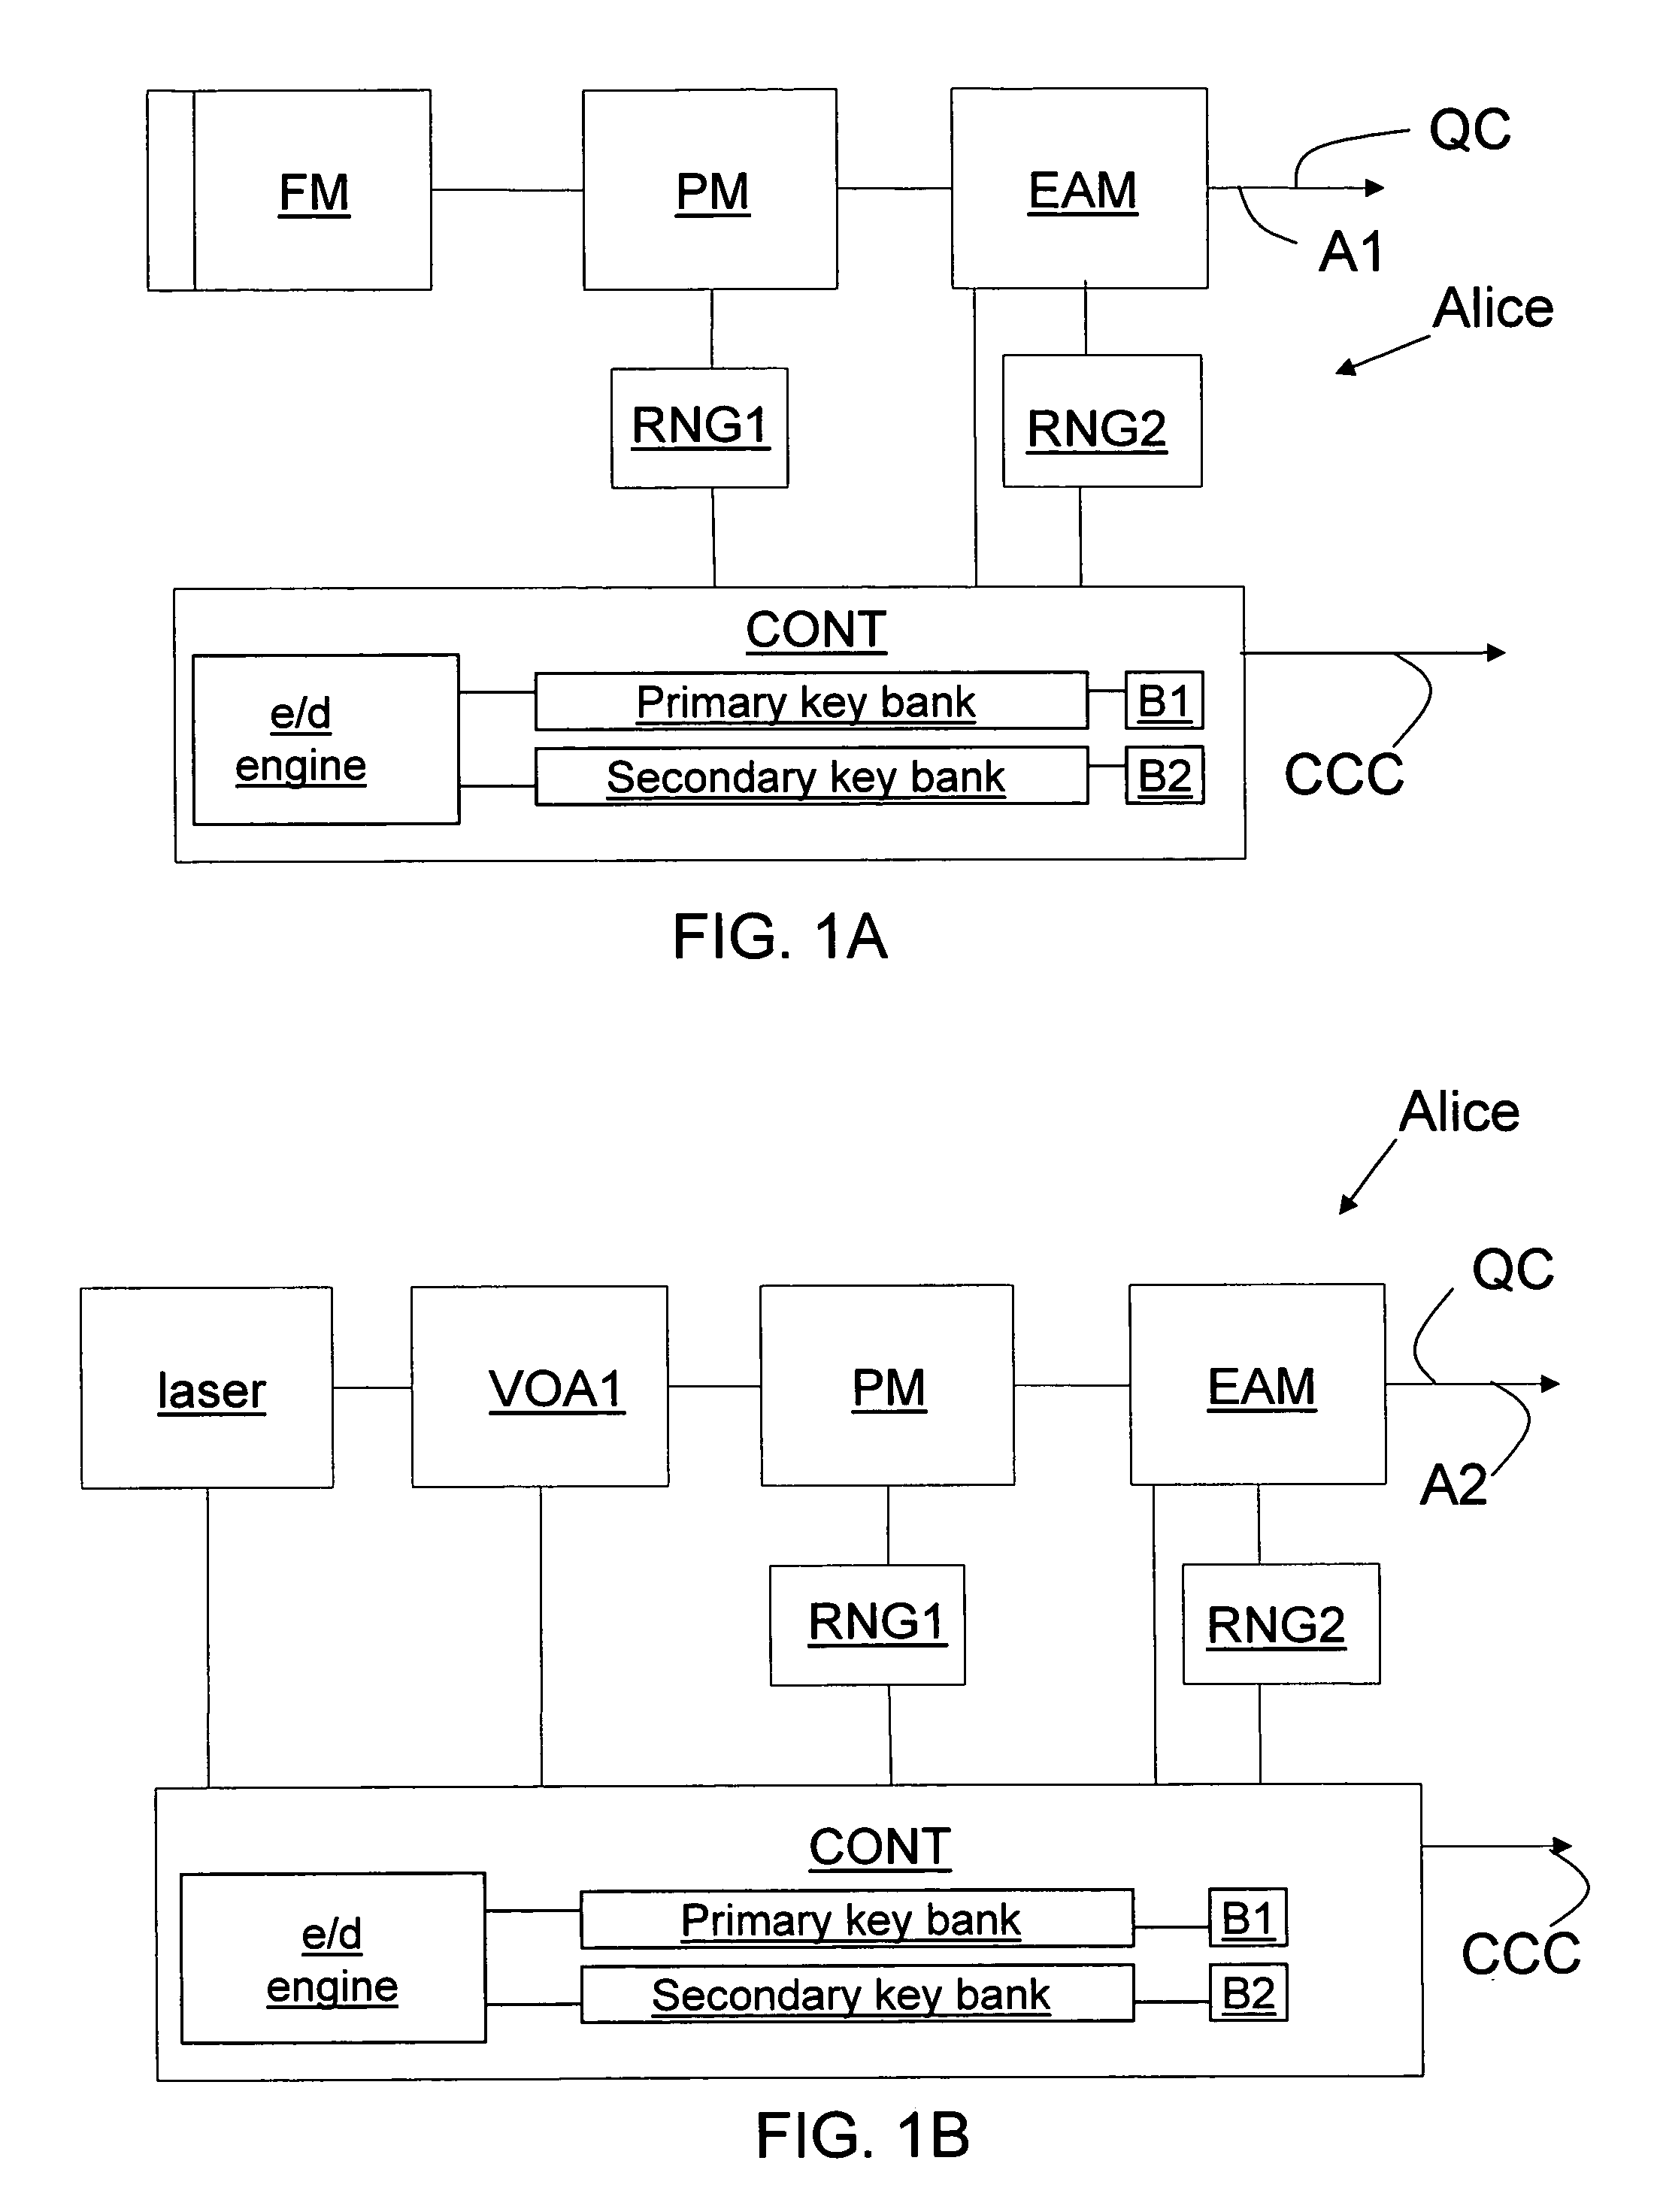 Key bank systems and methods for QKD